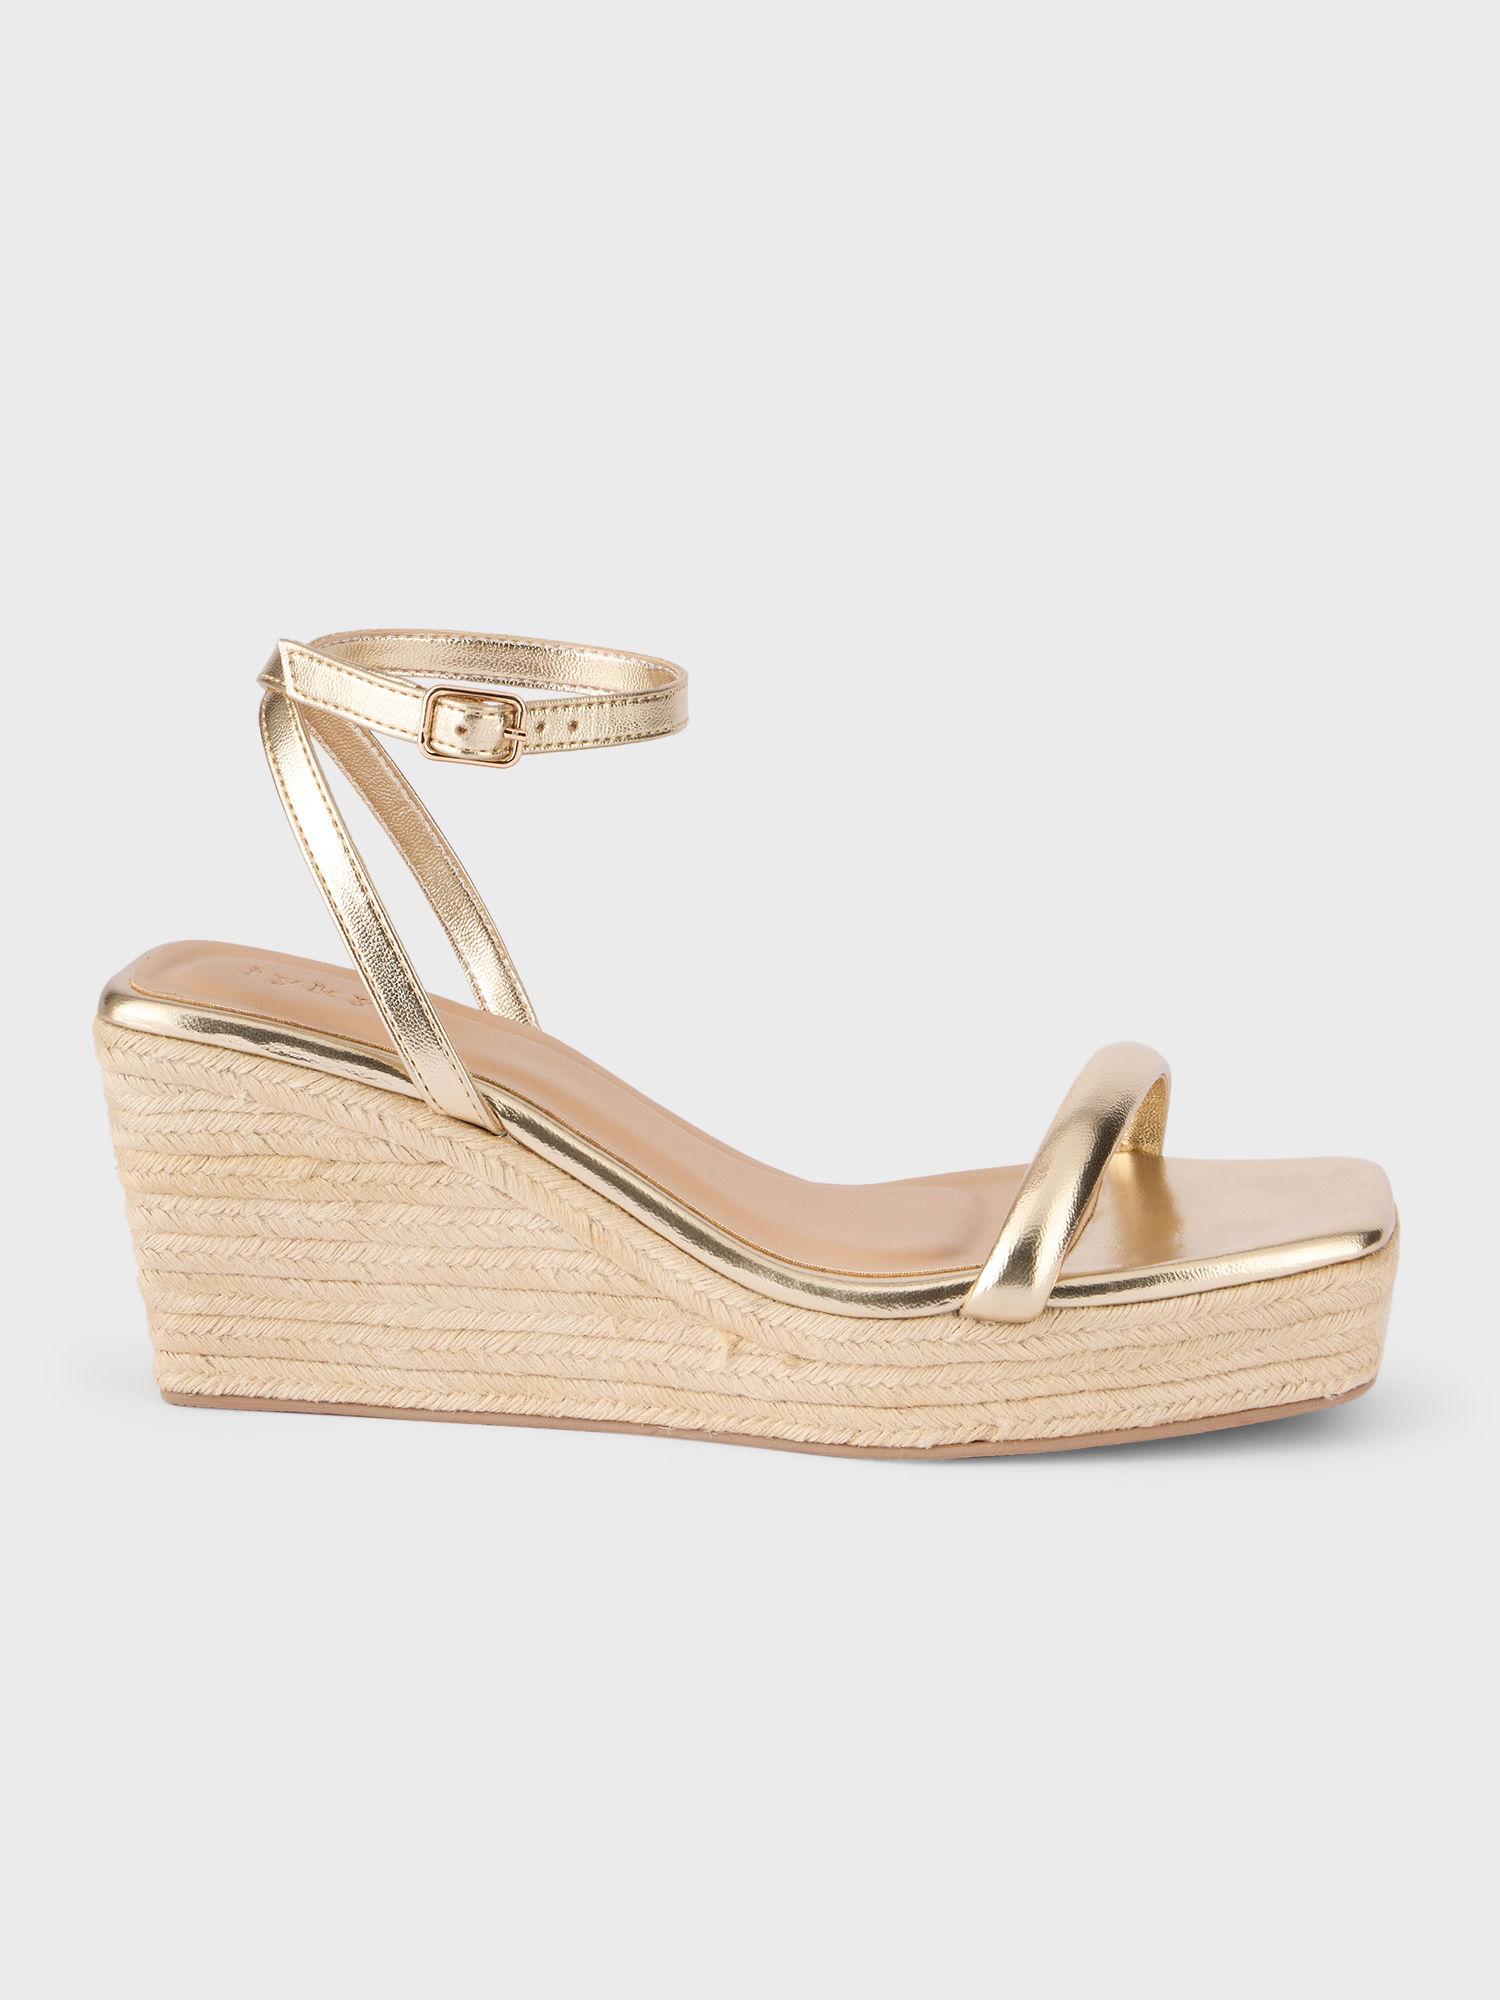 gold metallic ankle strap square toe wedge heels